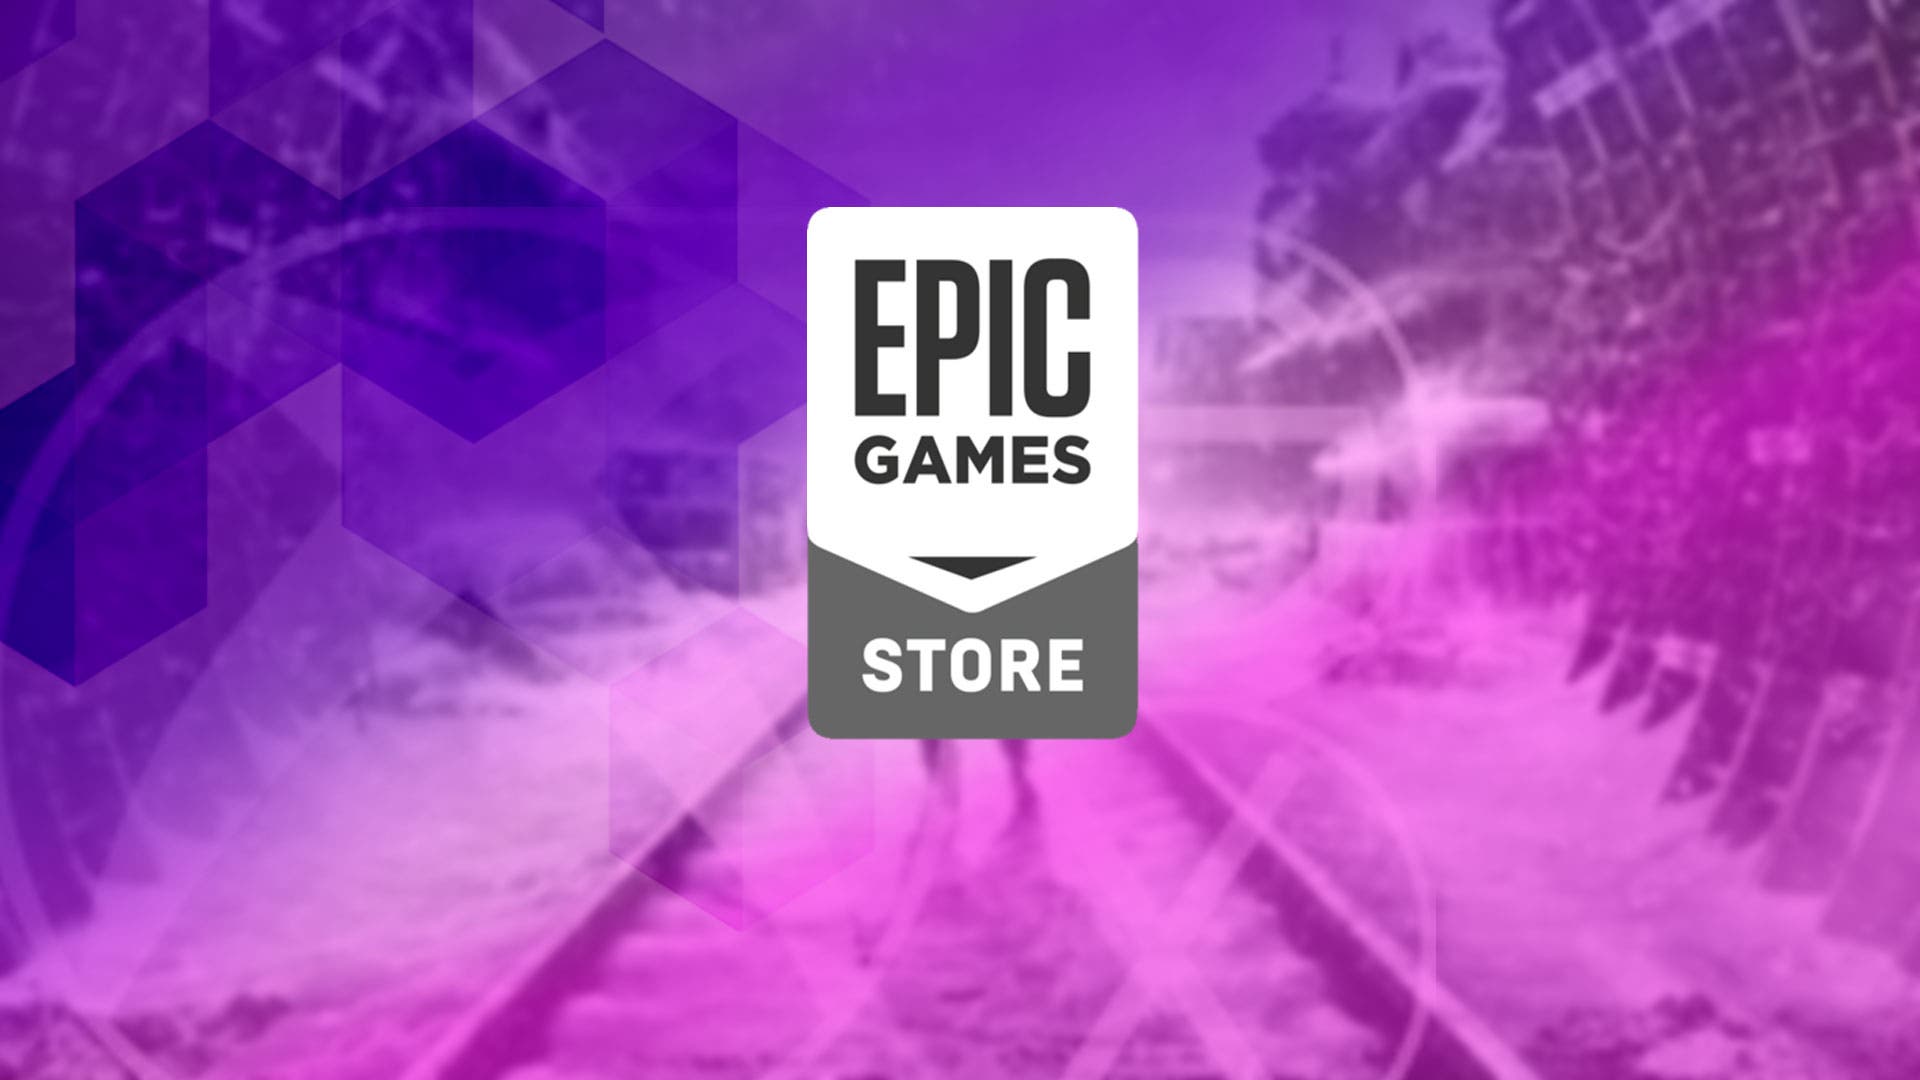 Epic Games Store Is Giving Away 15 Games for Free this Christmas